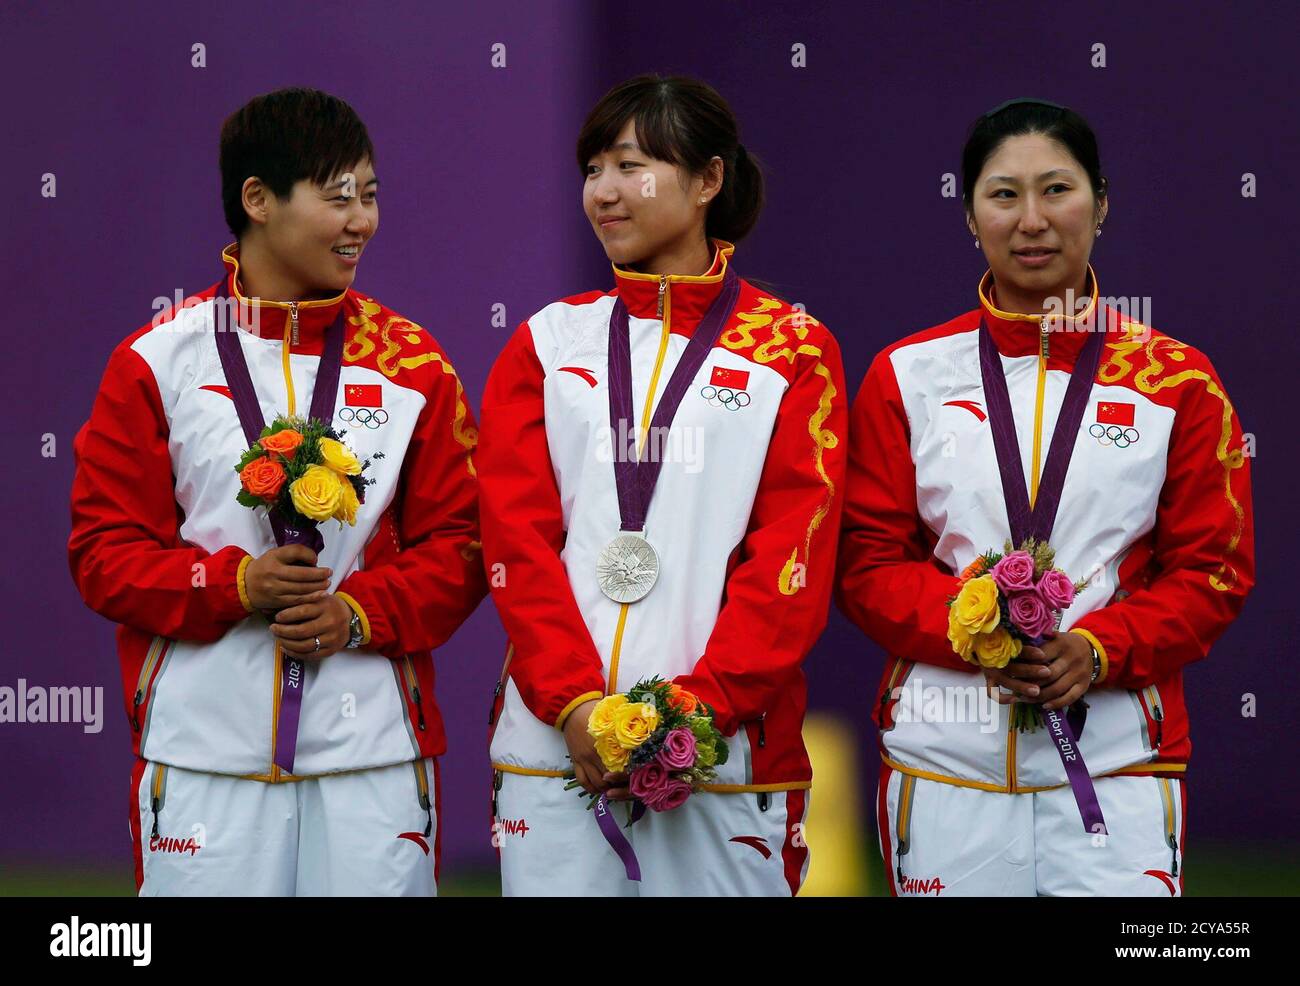 China's archers (L-R) Cheng Ming, Fang Yuting and Xu Jing celebrate with their silver medals after their women's archery team match against South Korea at the Lords Cricket Ground during the London 2012 Olympic Games July 29, 2012. REUTERS/Suhaib Salem (BRITAIN  - Tags: SPORT OLYMPICS SPORT ARCHERY) Stock Photo